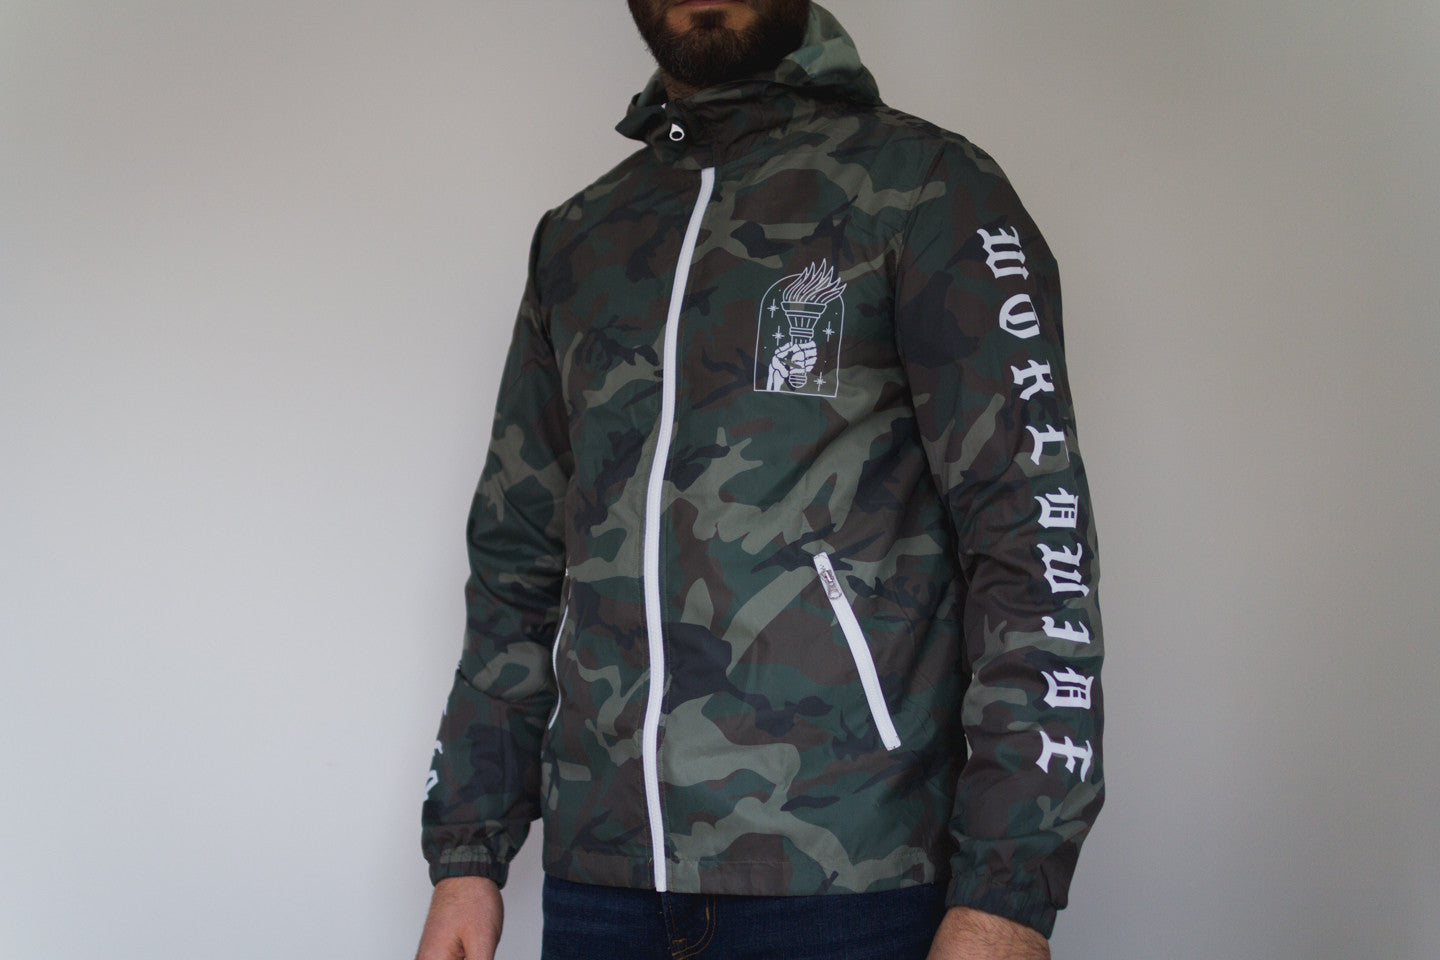 I'll Carry This Torch straight edge windbreaker in camo